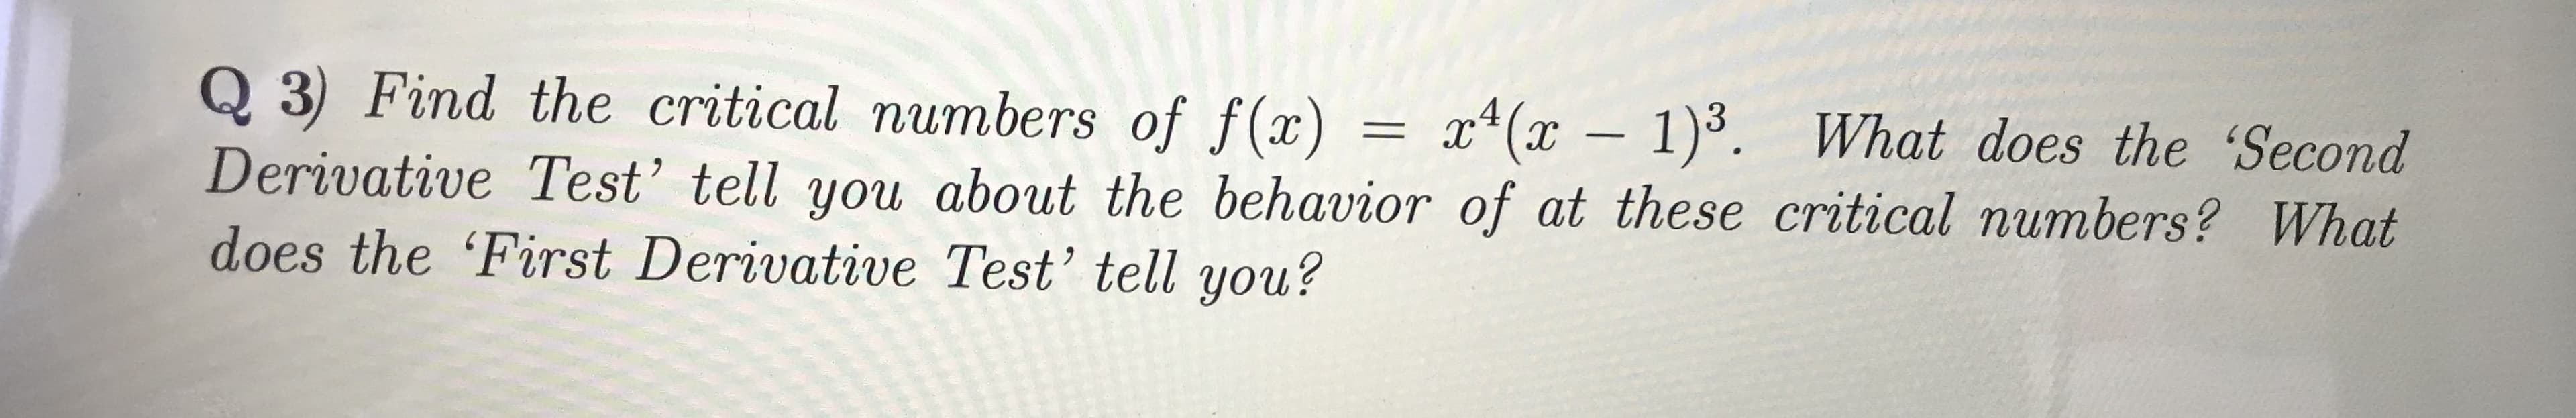 Q 3) Find the critical numbers of f(x) = x4(x - 1).
Derivative Test' tell you about the behavior of at these critical numbers? What
does the 'First Derivative Test' tell you?
What does the 'Second
